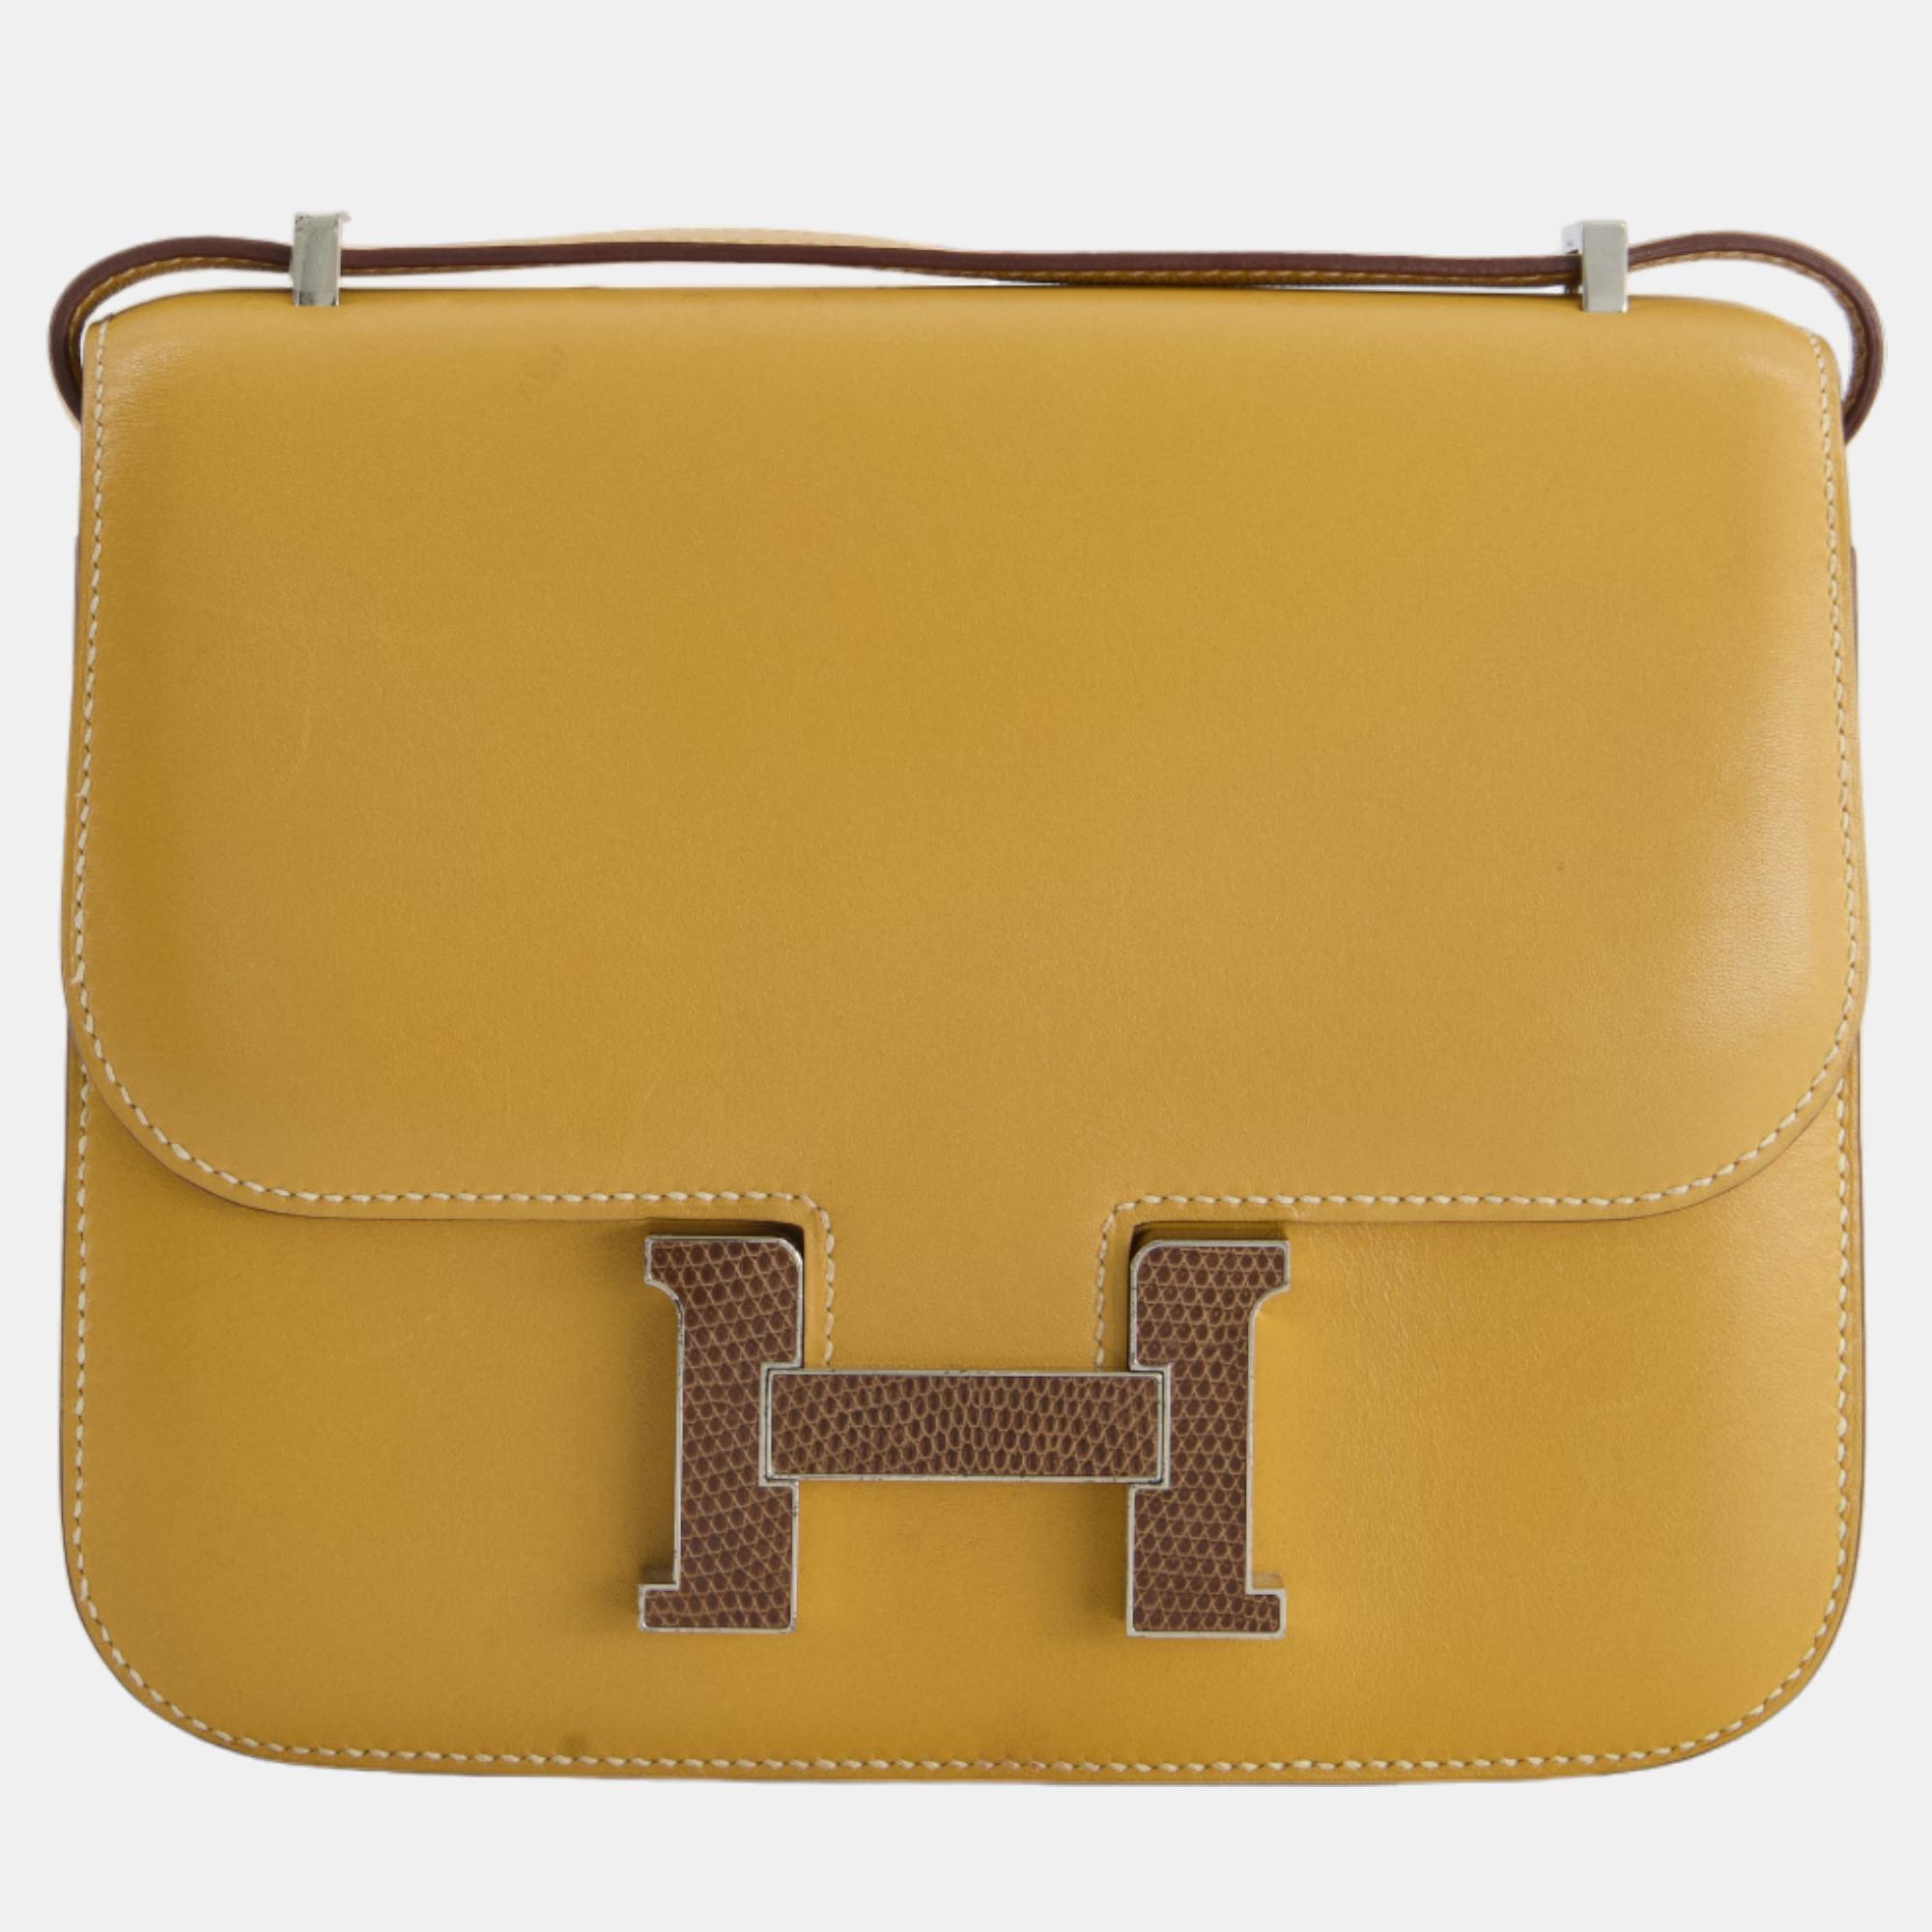 Hermes Mini Constance Bag 18cm In Paille Swift Leather With Palladium And Lizard Hardware